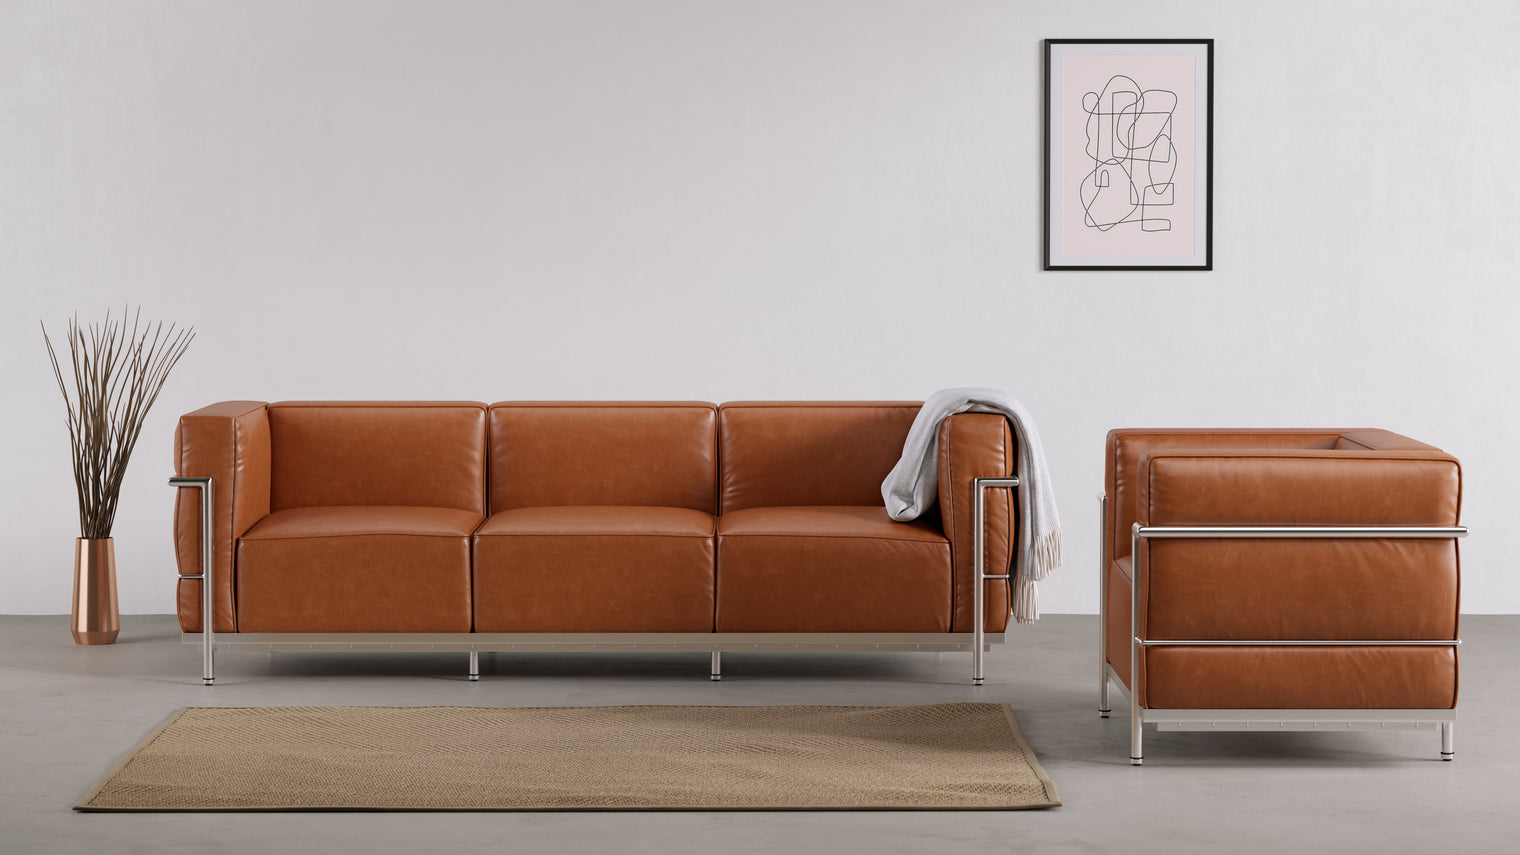 Introducing a Modern Makeover|Inspired by the classic club chair, the designer created the tempting, modern form of the Grand Modele Three-Person Sofa. Featuring deep seating and a minimalist, external steel frame, this seat transforms what’s expected of a sofa.
